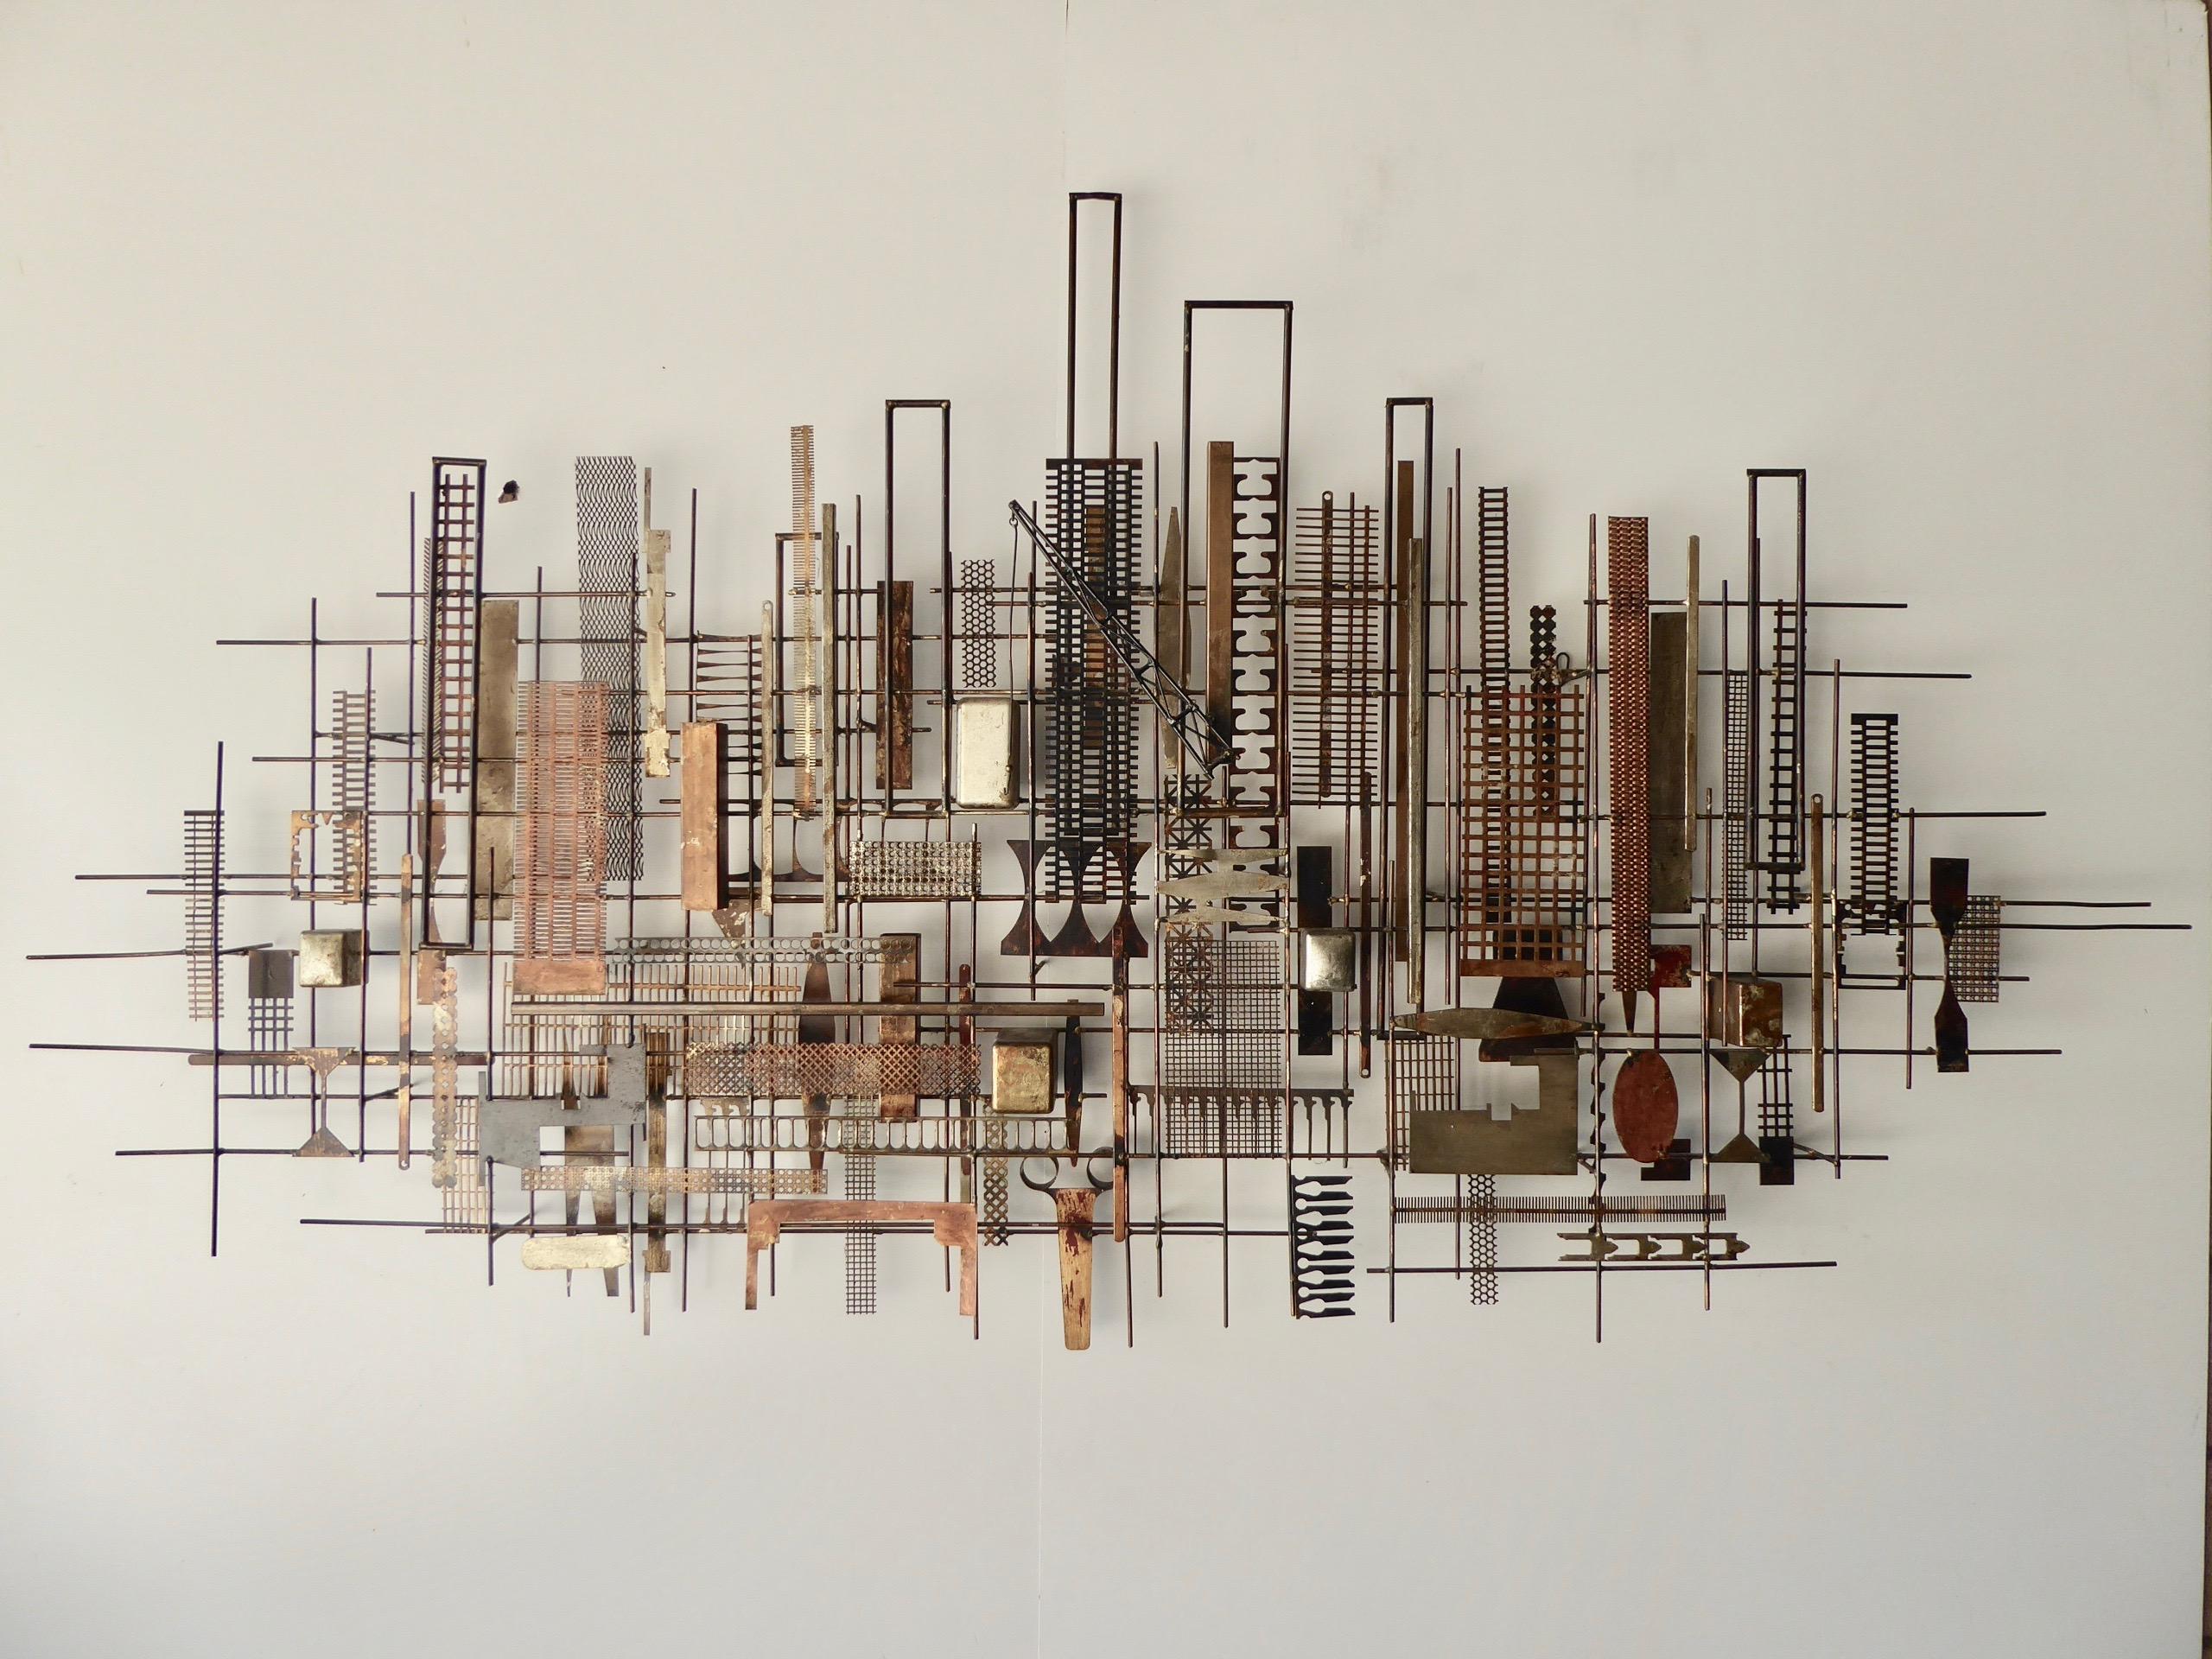 A joyful, super large-scale, fantasy city skyline wall sculpture (circa 1970) by American artist William Bowie, (1926-1994). This over seven foot wide Brutalist metal wall sculpture is one of the largest pieces ever done by this artist and is most